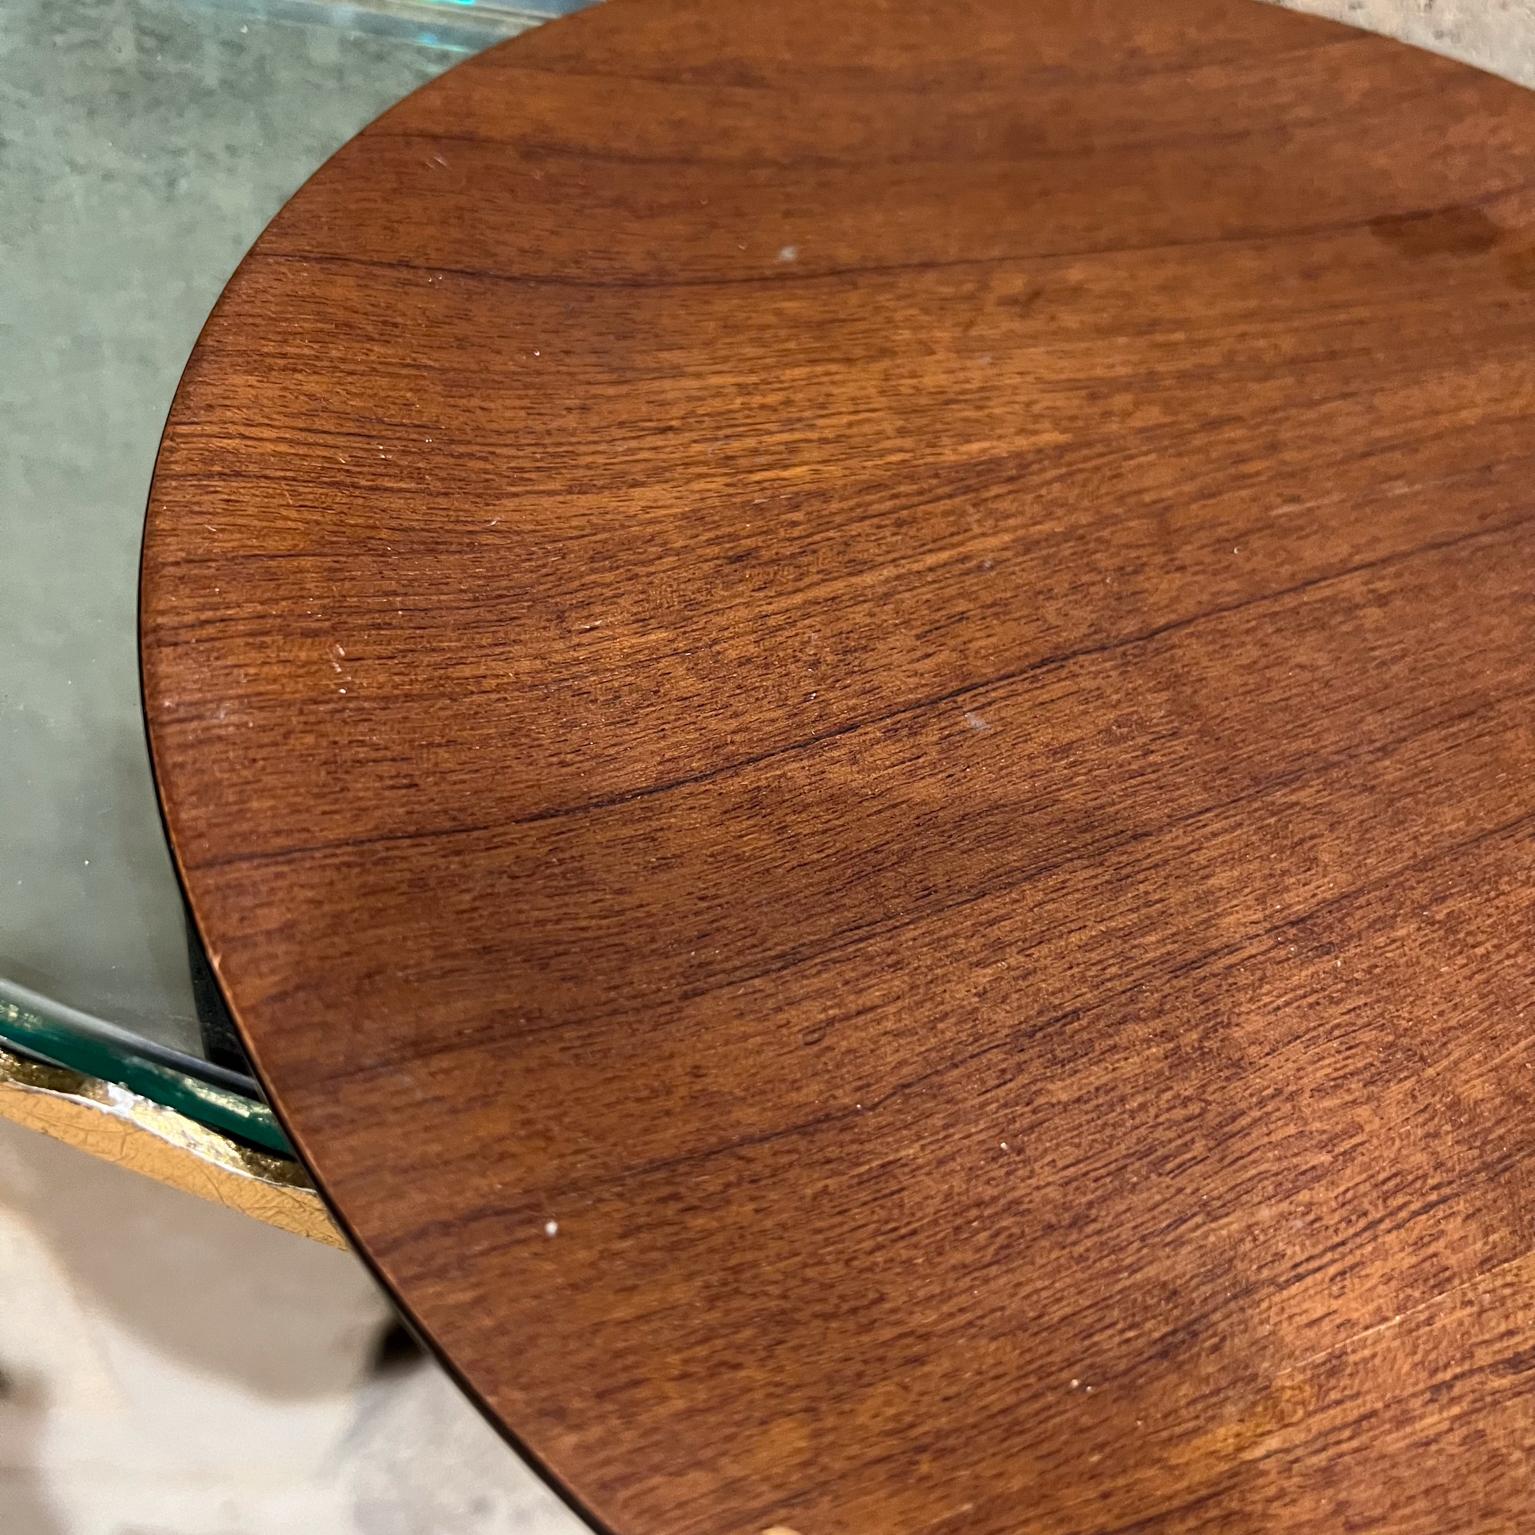 1970s Modernist Platter Teak Wood on Black Plate In Good Condition For Sale In Chula Vista, CA